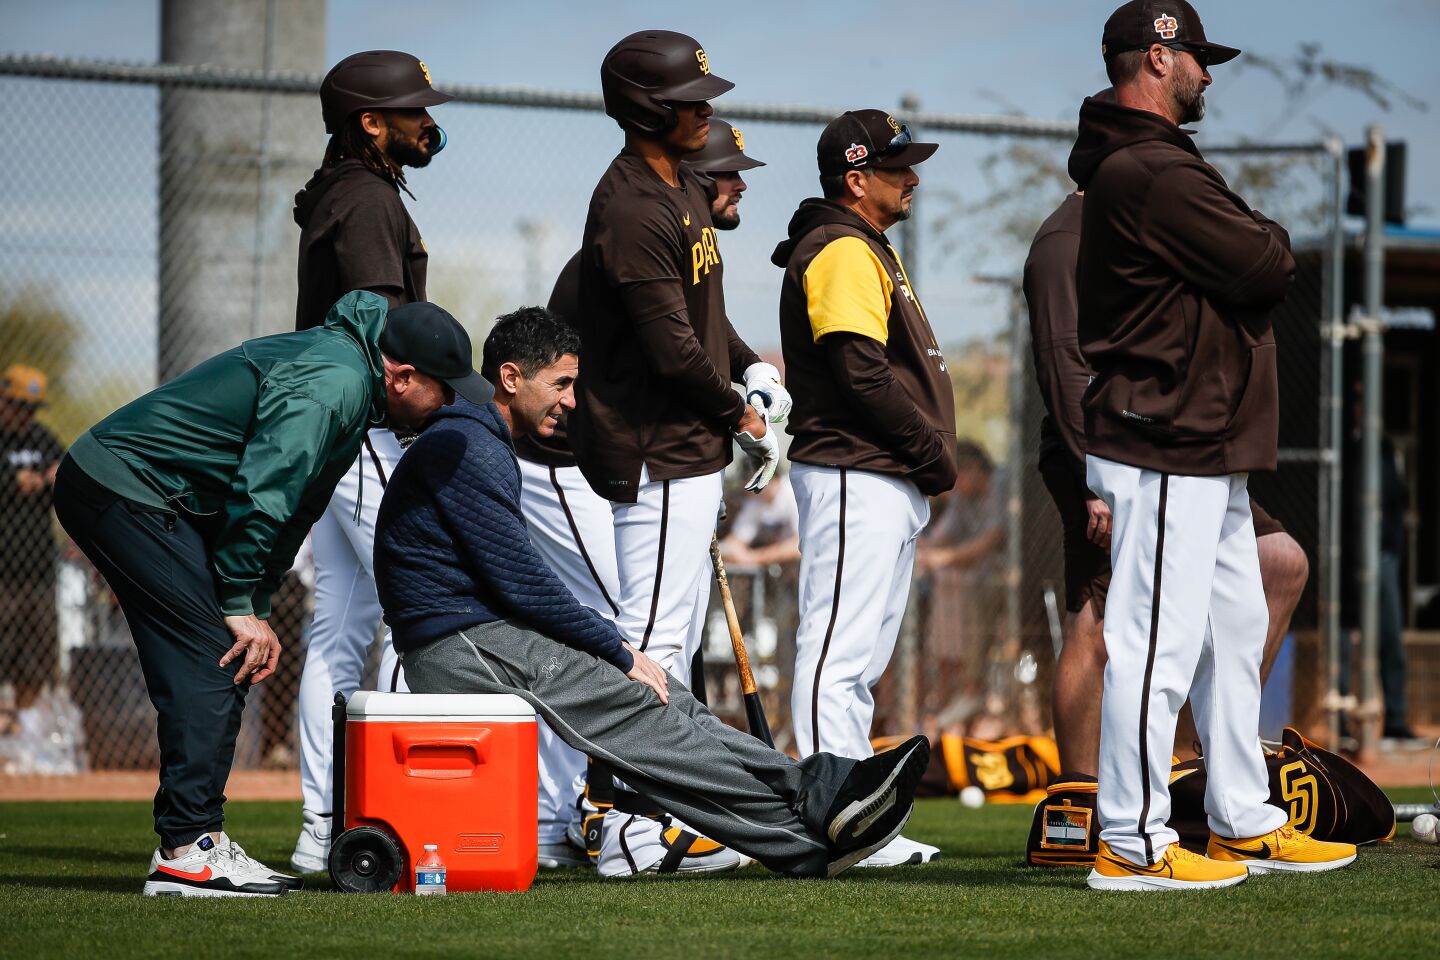 Padres assistant general manager Josh Stein and general manager AJ Preller chat during a spring training practice at the Peoria Sports Complex on Tuesday, Feb. 21, 2023 in Peoria, AZ.